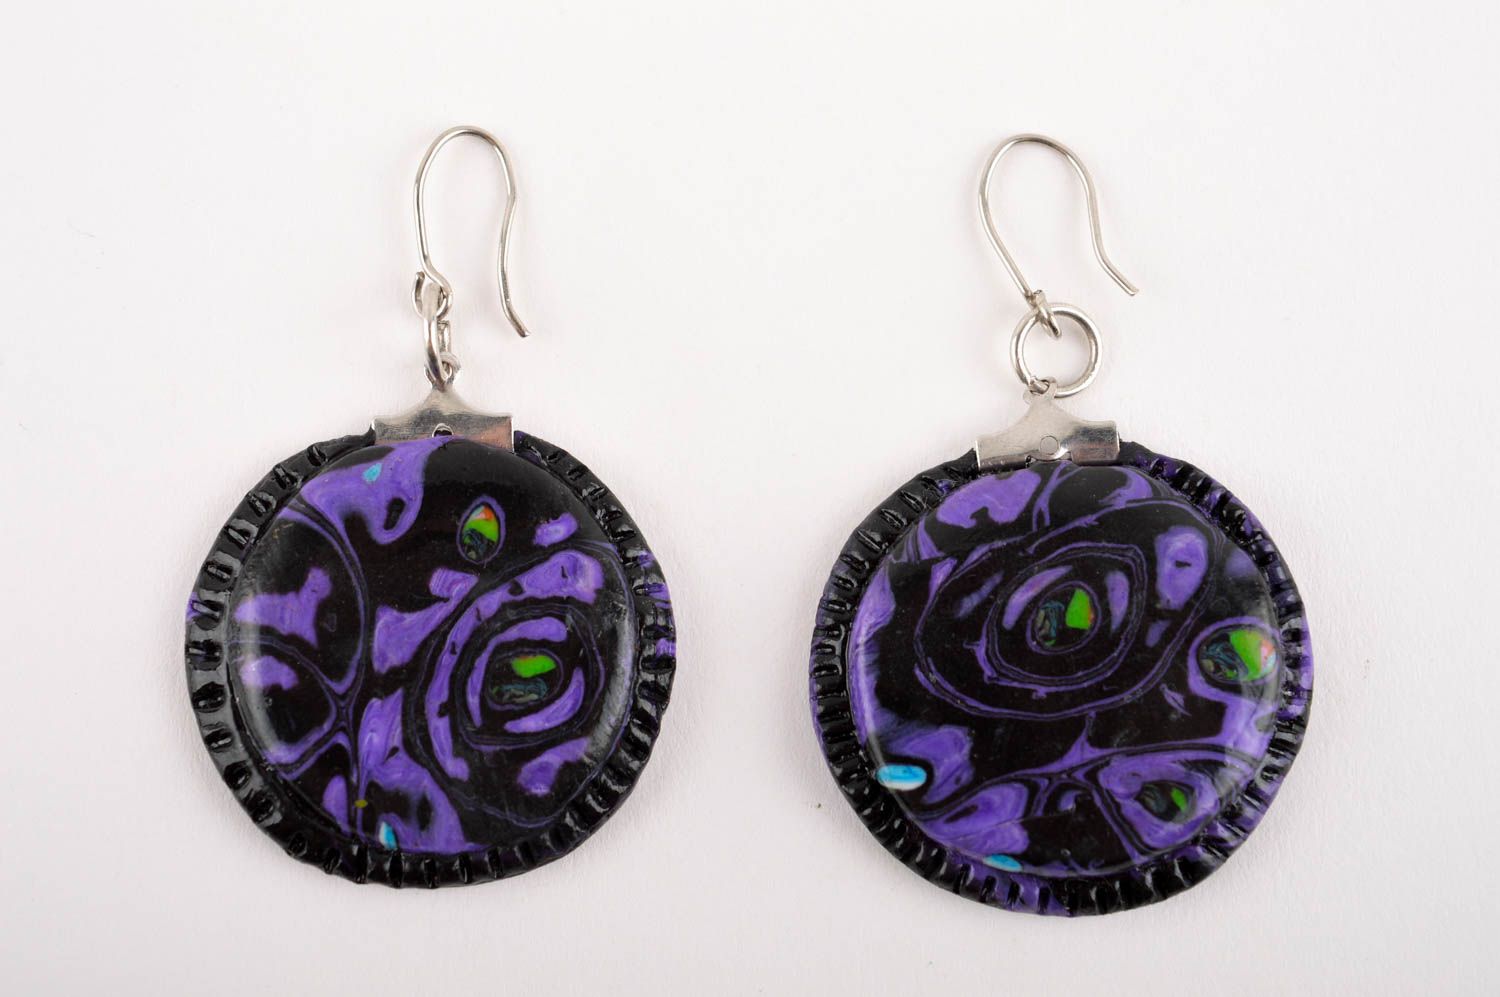 Handmade plastic earrings design round earrings polymer clay ideas gifts for her photo 3